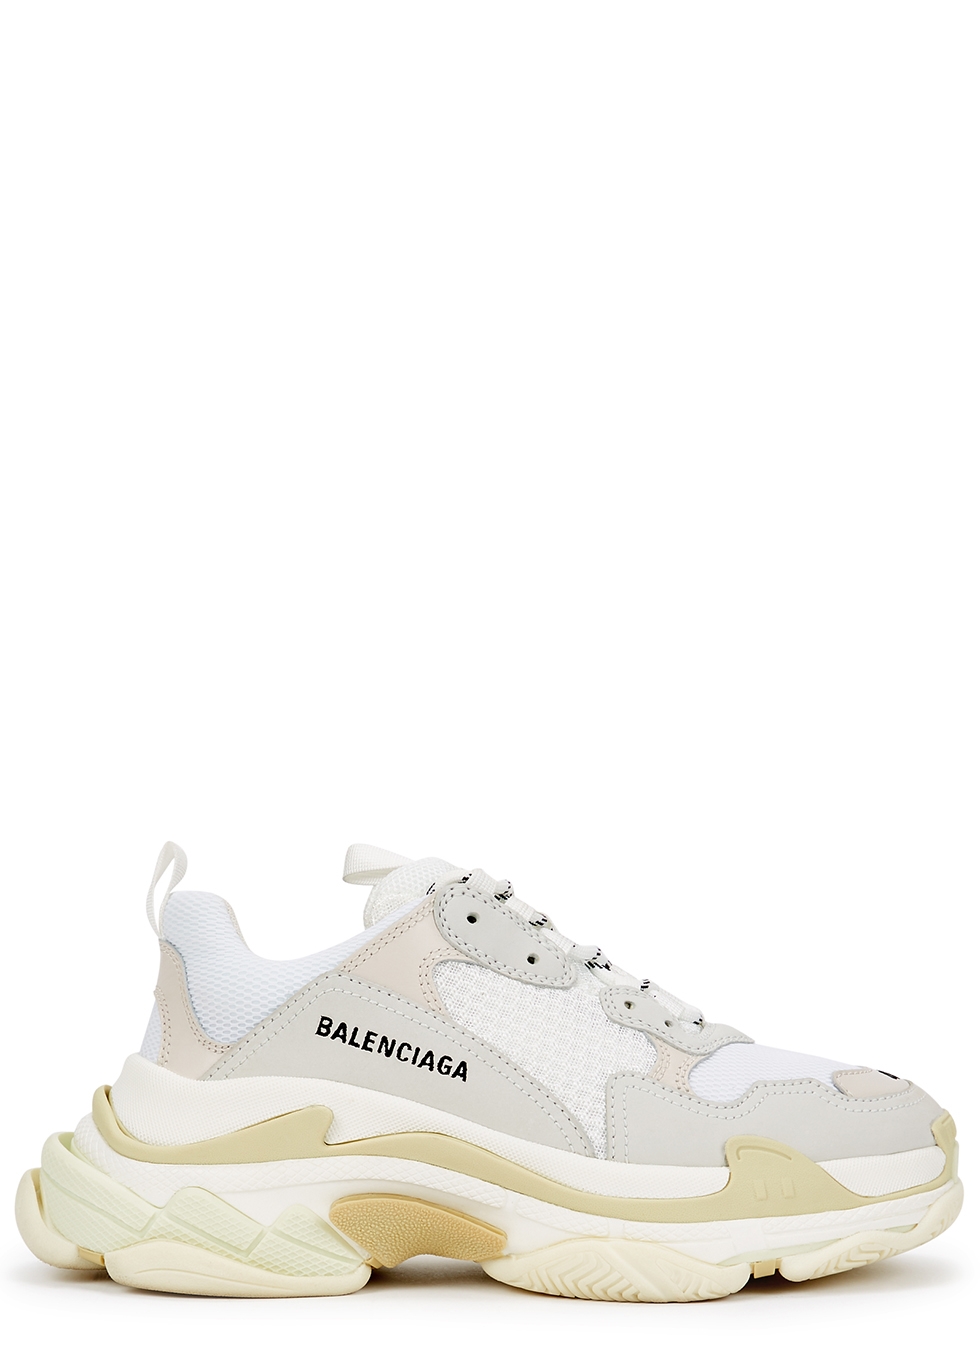 Balenciaga Triple S Clear Sole Trainers in Grey Gray for